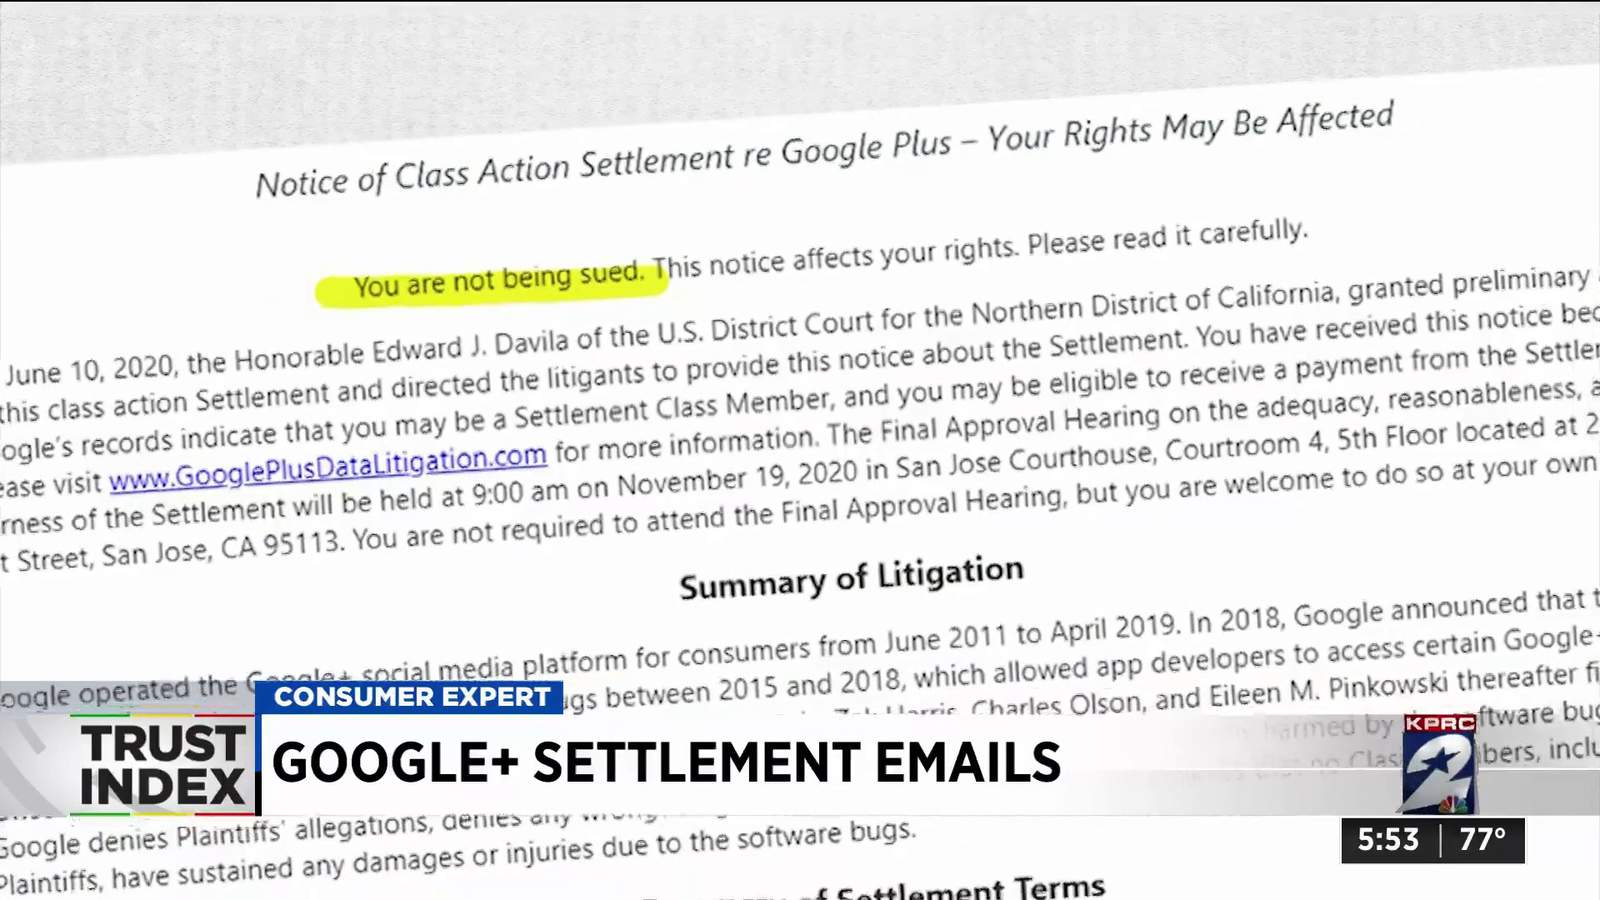 Trust Index: Is the Google Plus settlement email a scam?